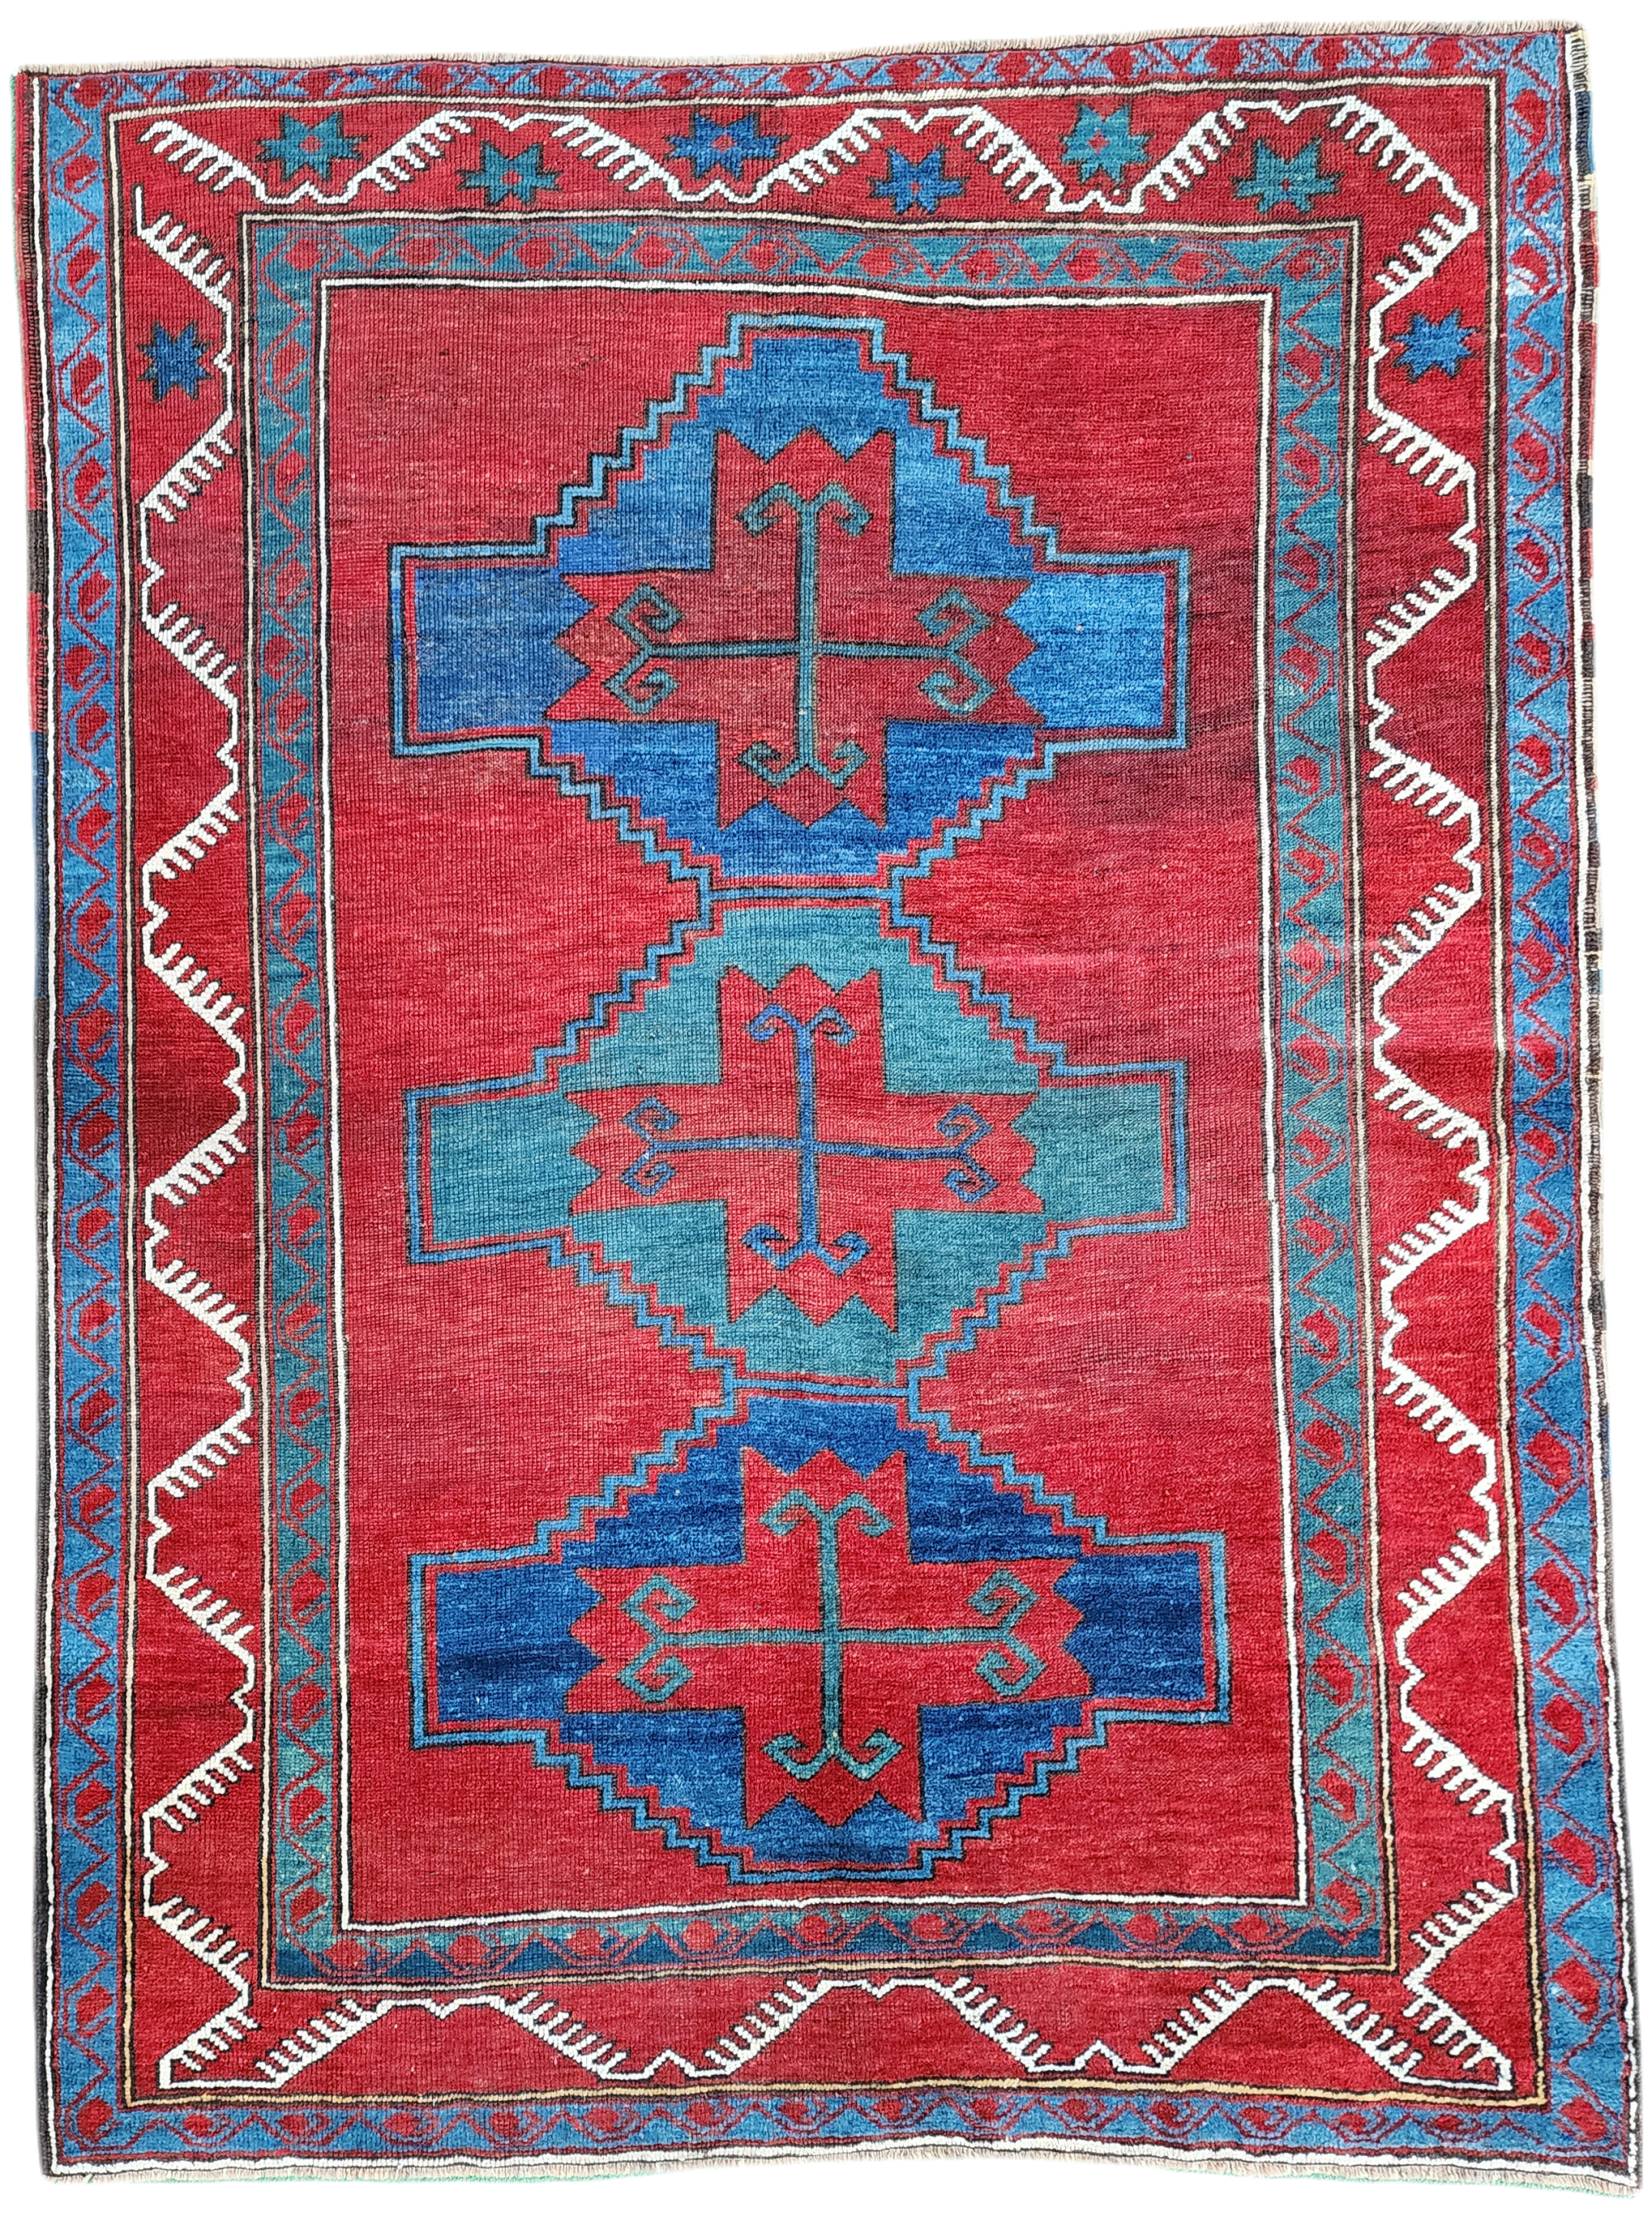 Antique Caucasian Fahrola Rug 6 x 4 ft, Red Blue and Green Tribal Persian Area Rug